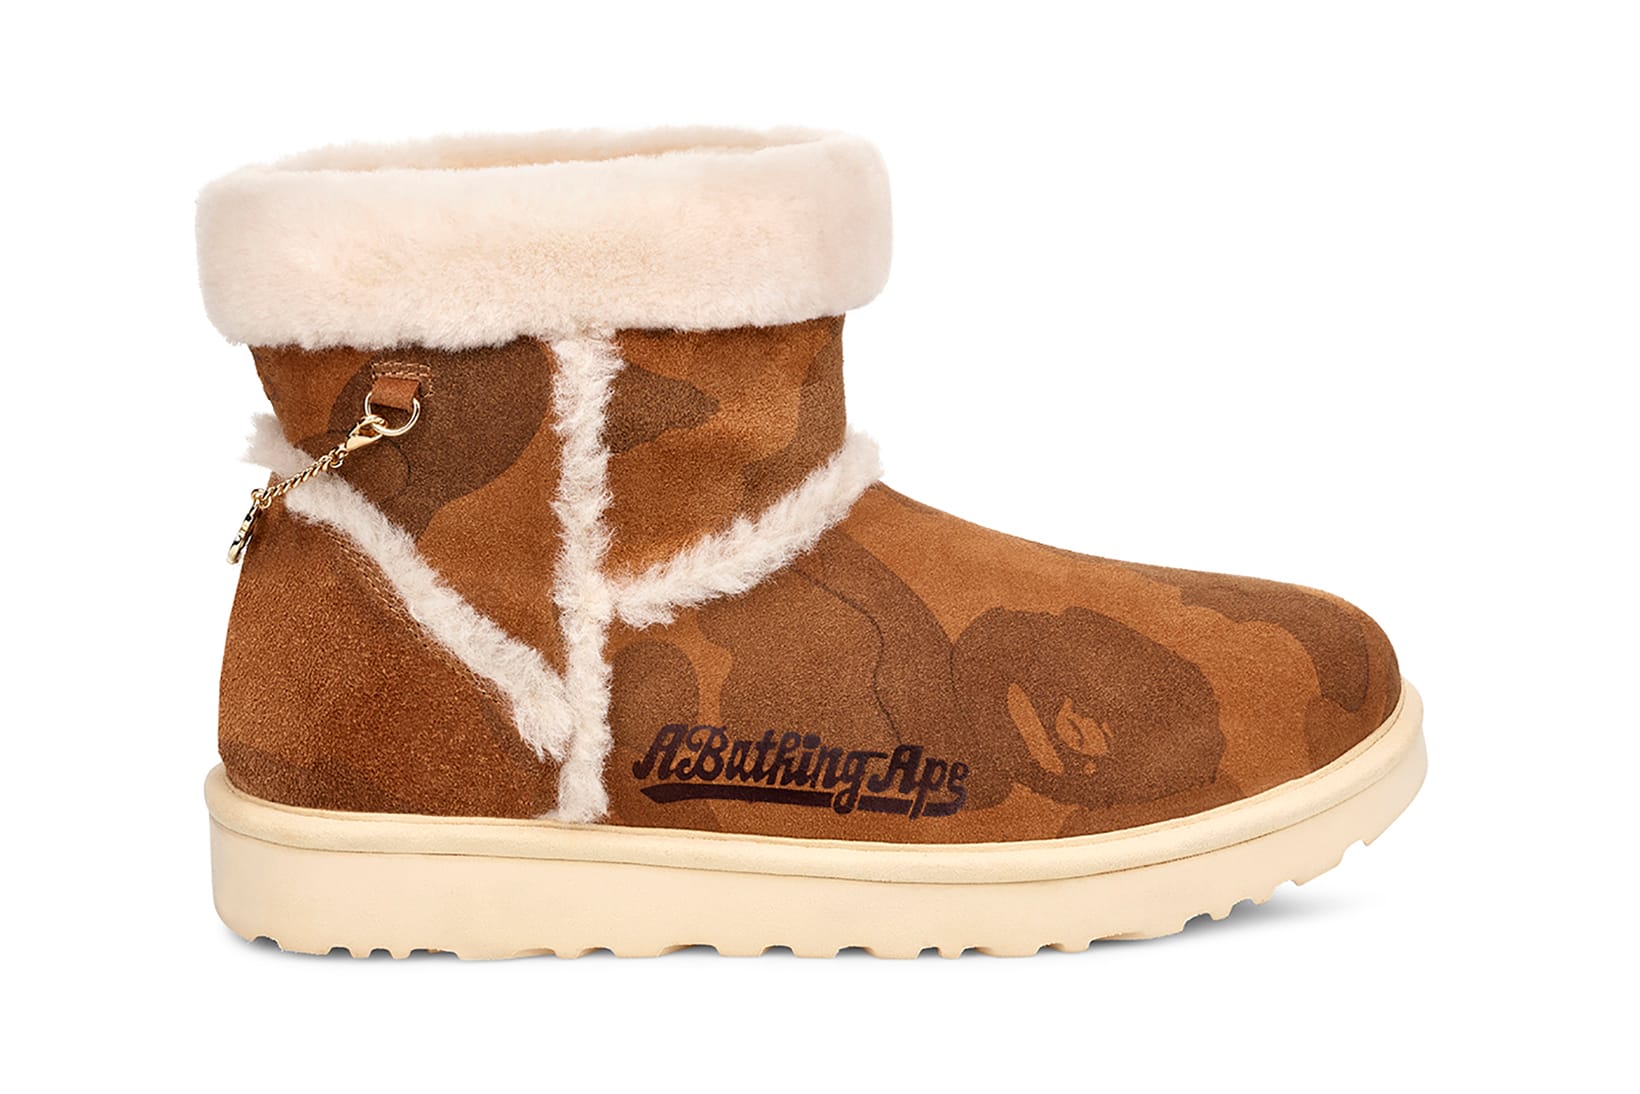 ugg new collection 2019